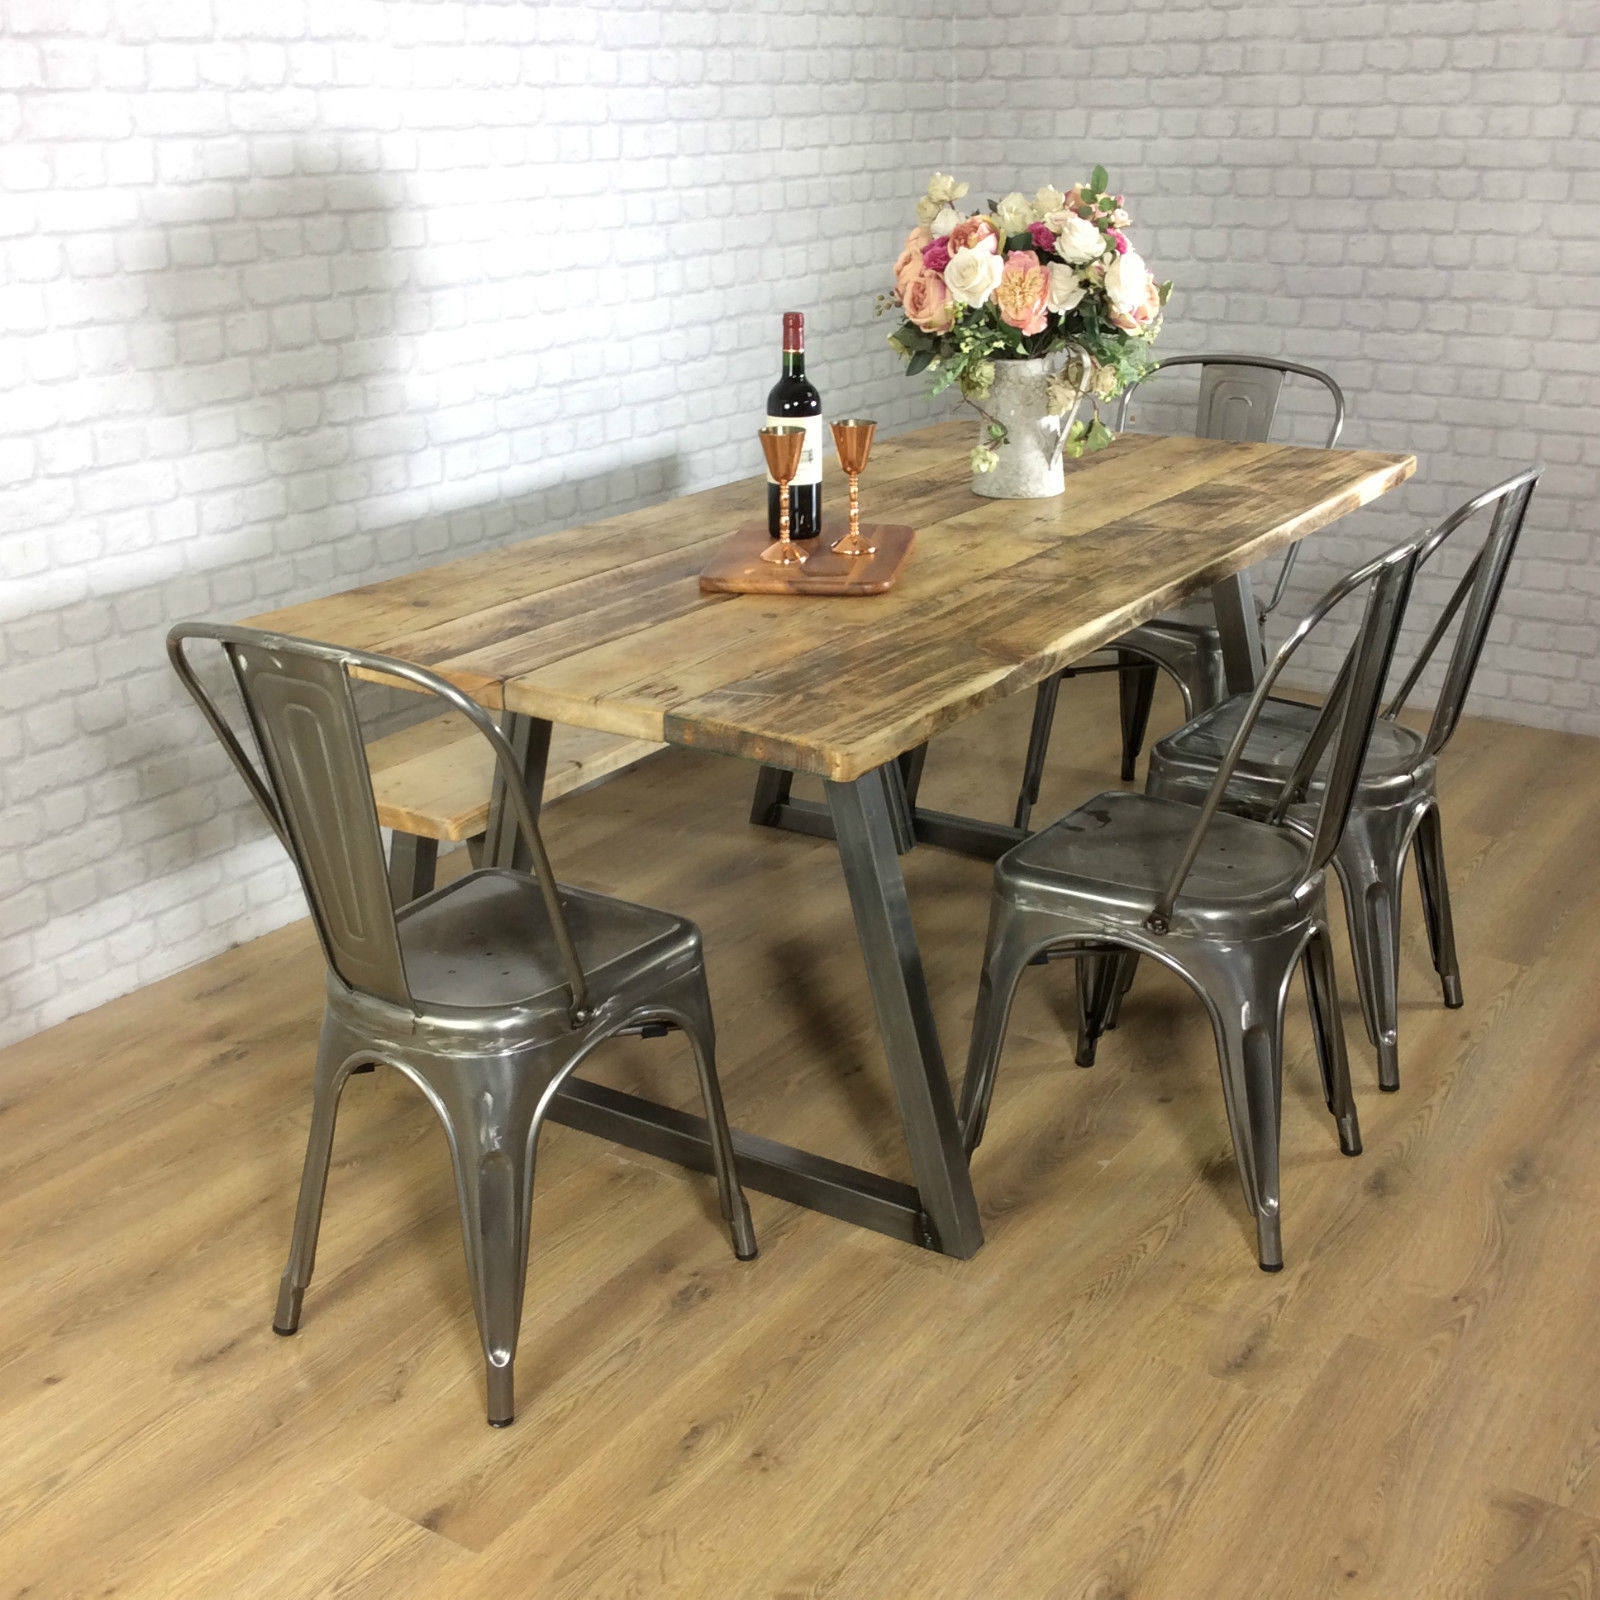 Rustic Dining Table Industrial 6 8 Seater Solid Reclaimed Wood Metal Bar  Cafe Restaurant Furniture Steel Handmade In Britain All Sizes | Shabby Bear  Cottage